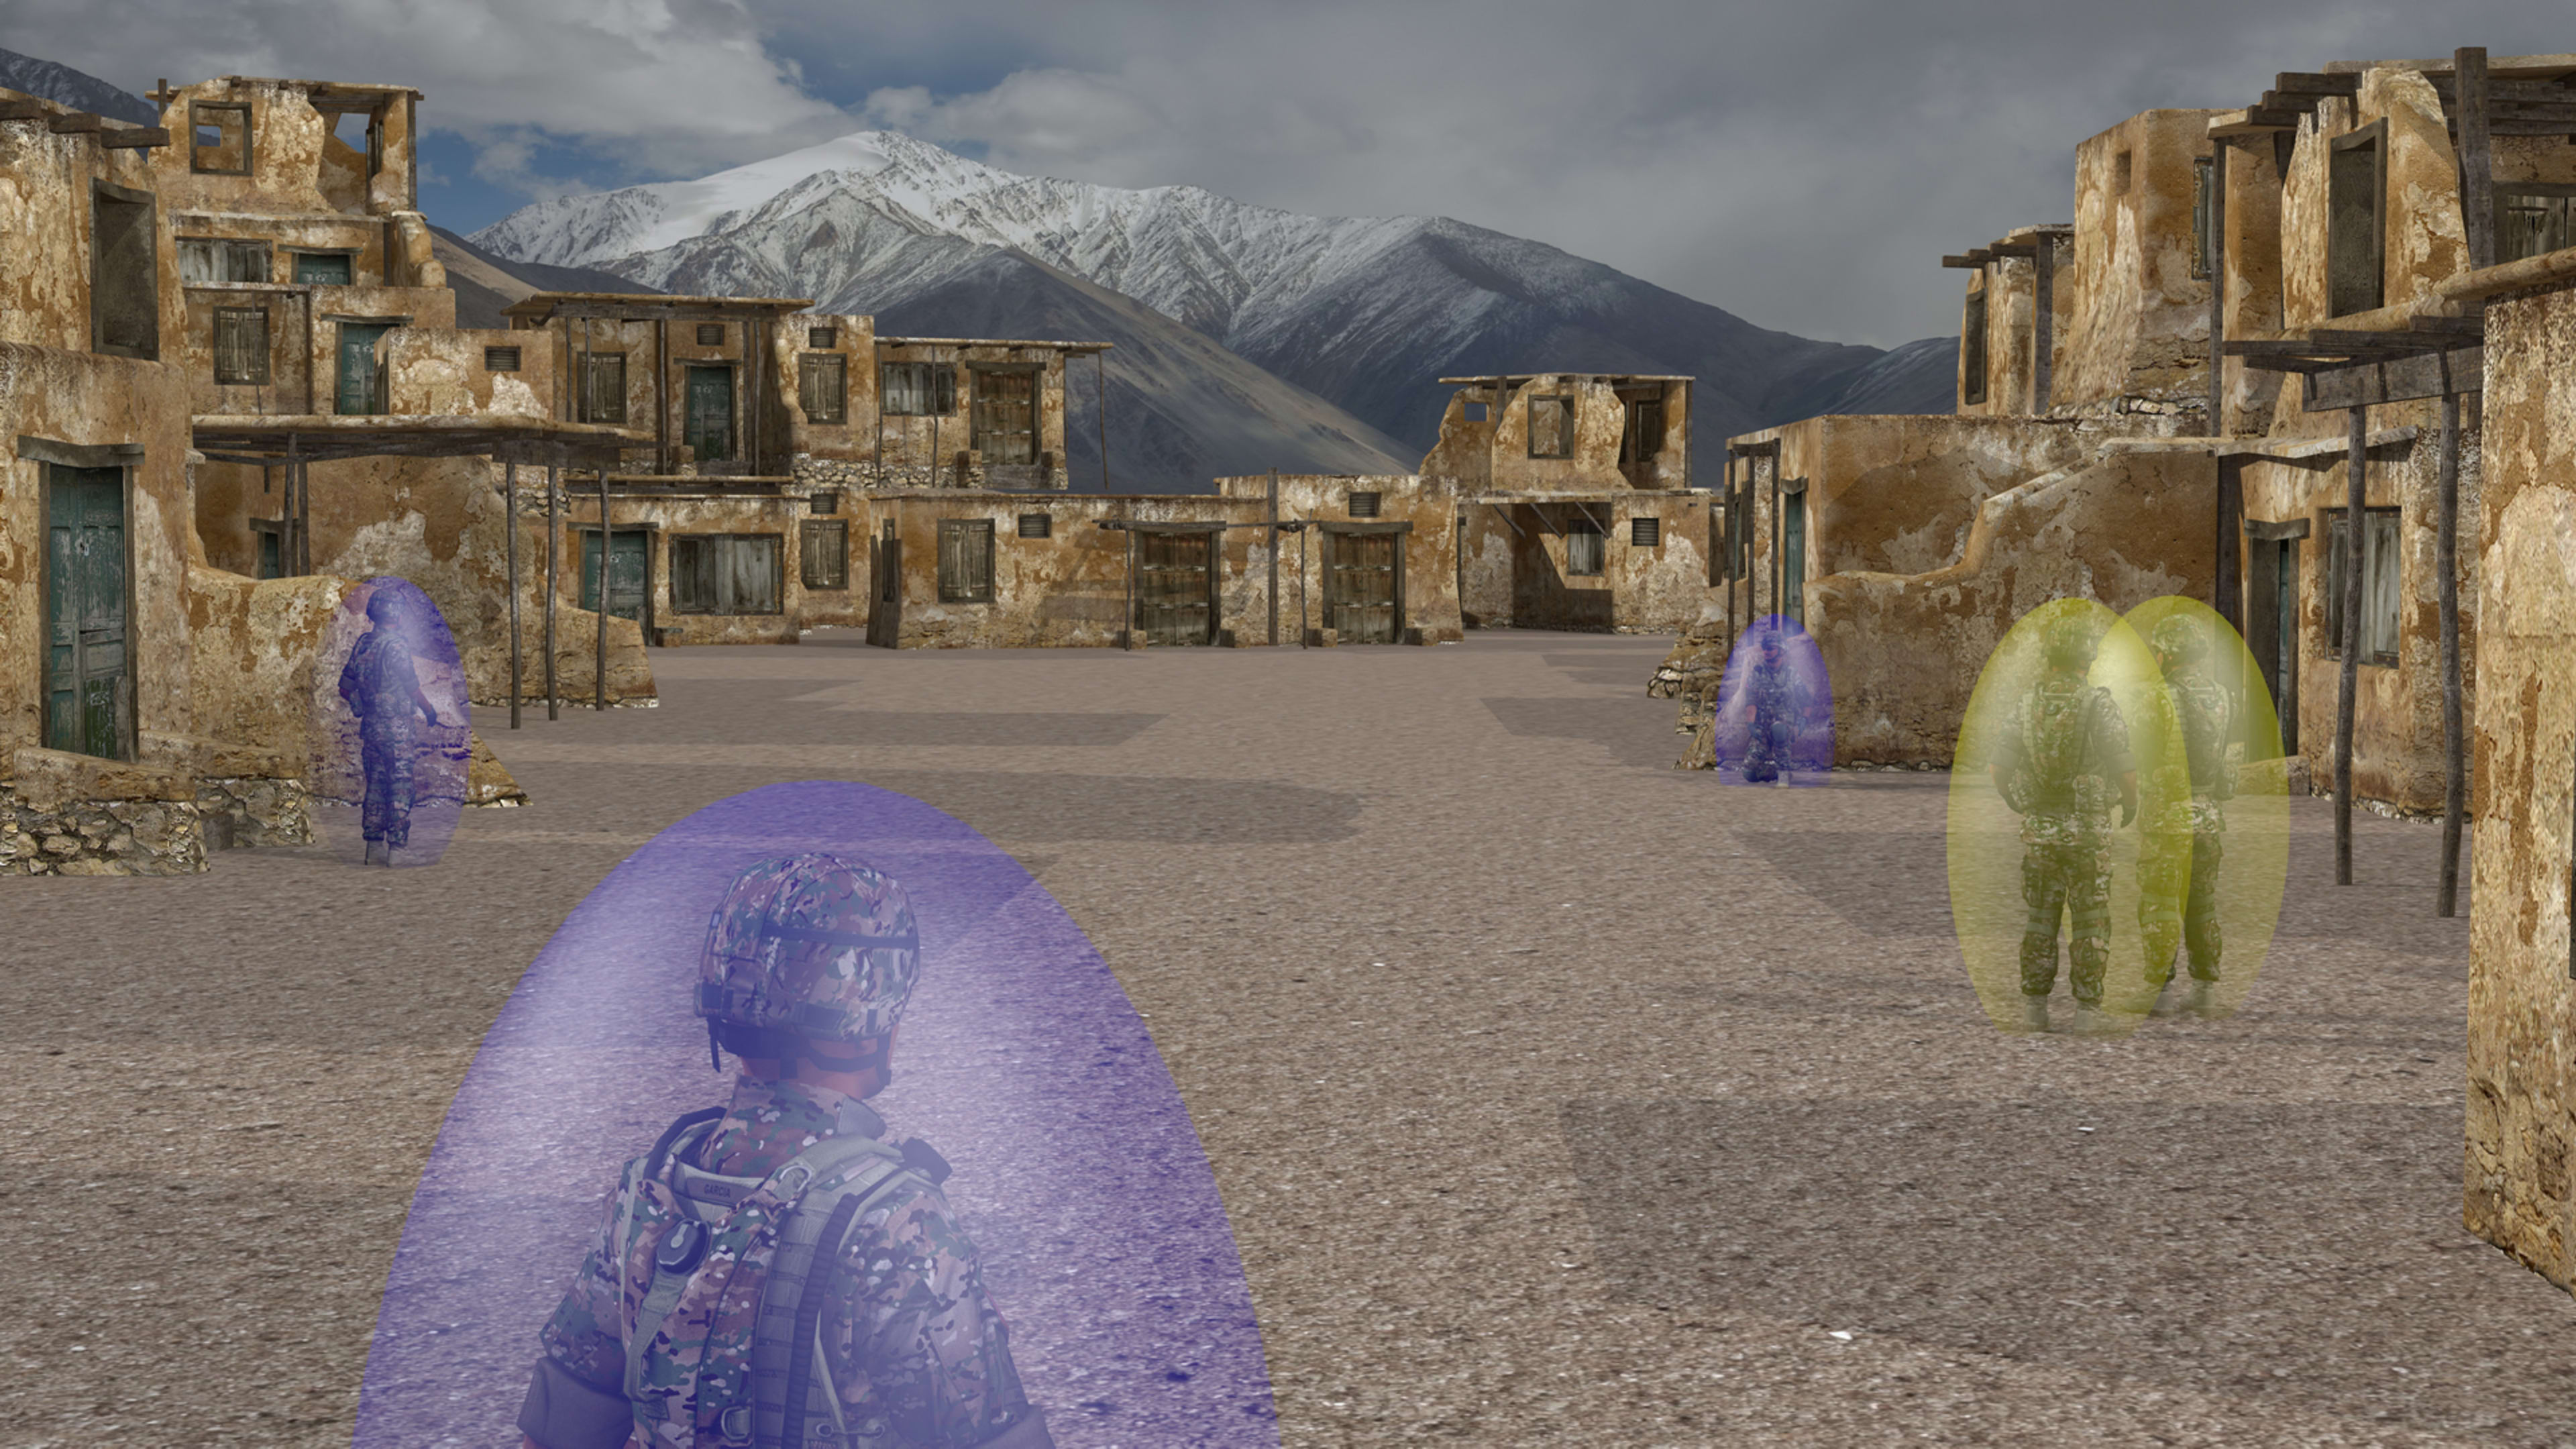 How Raytheon’s “Soldier In A Bubble” Technology Could Save Lives